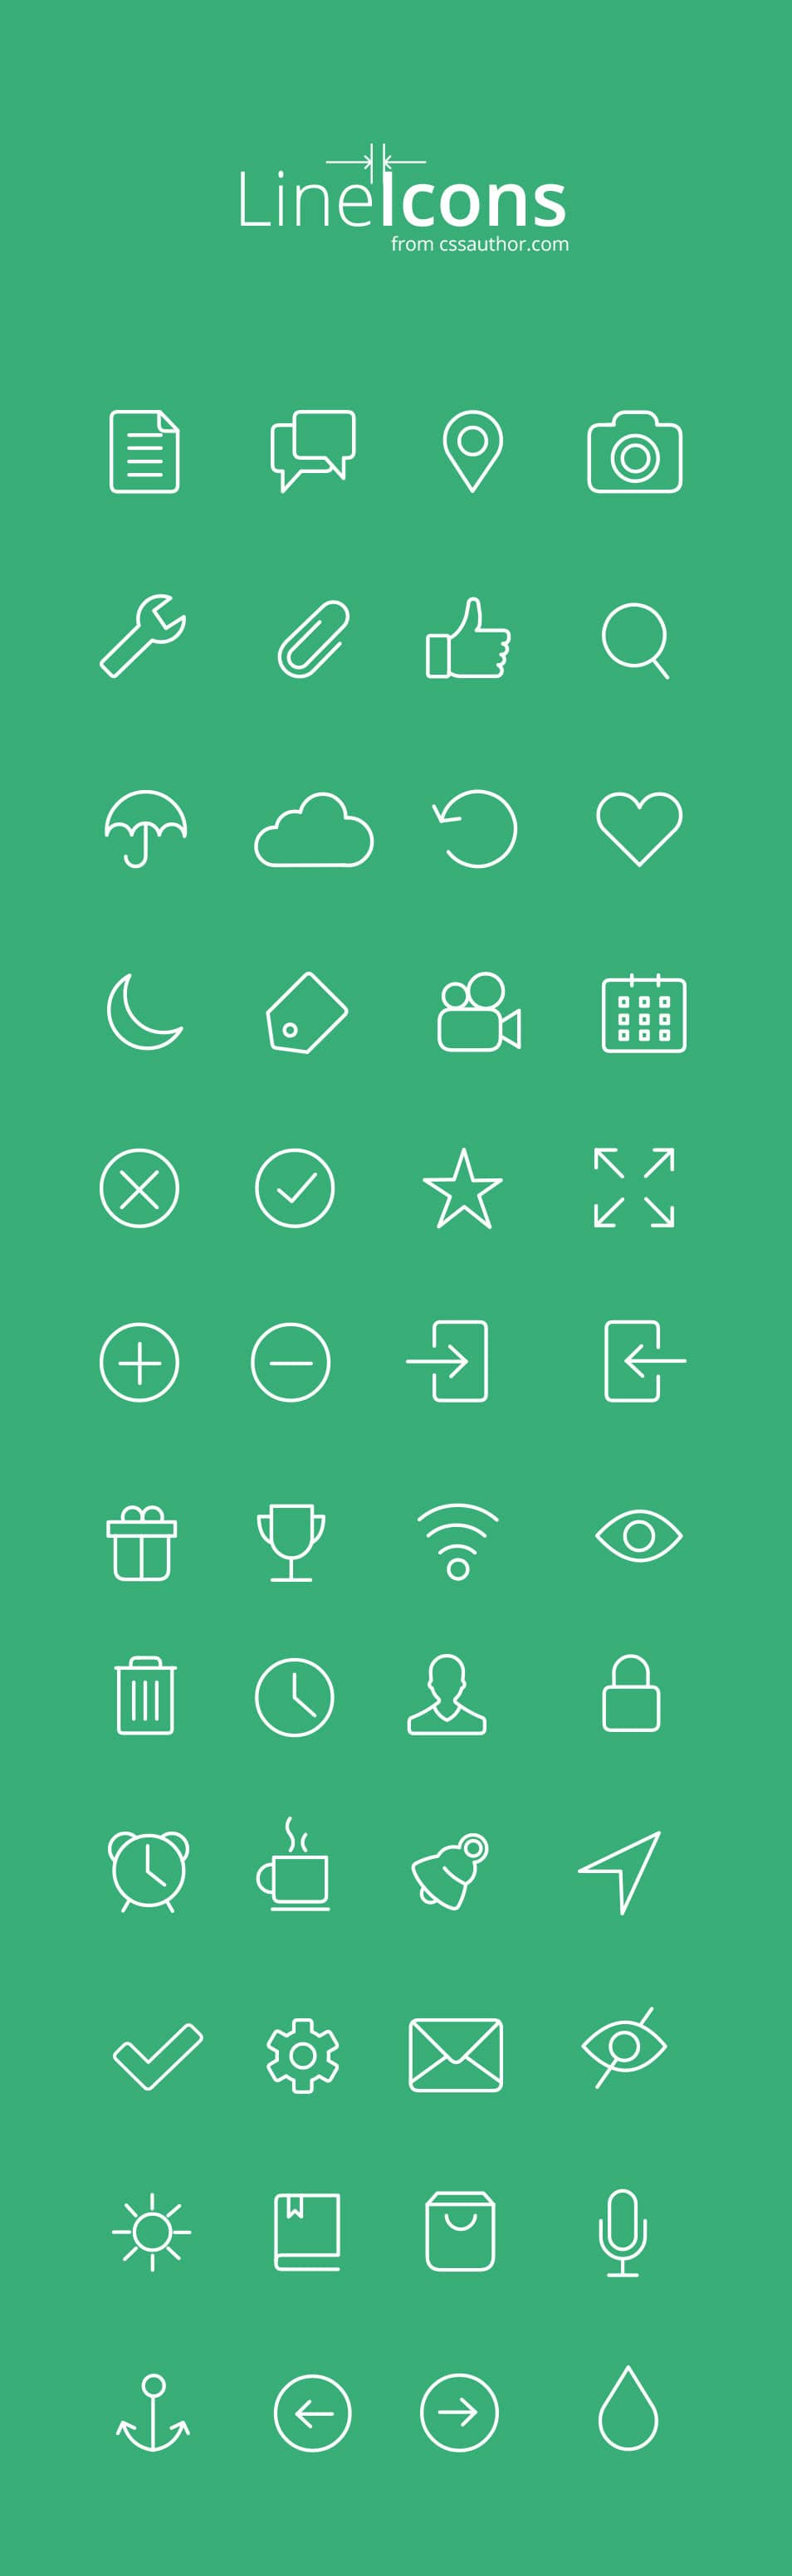 Line Icons – Free Line Icons for Web and UI Designs